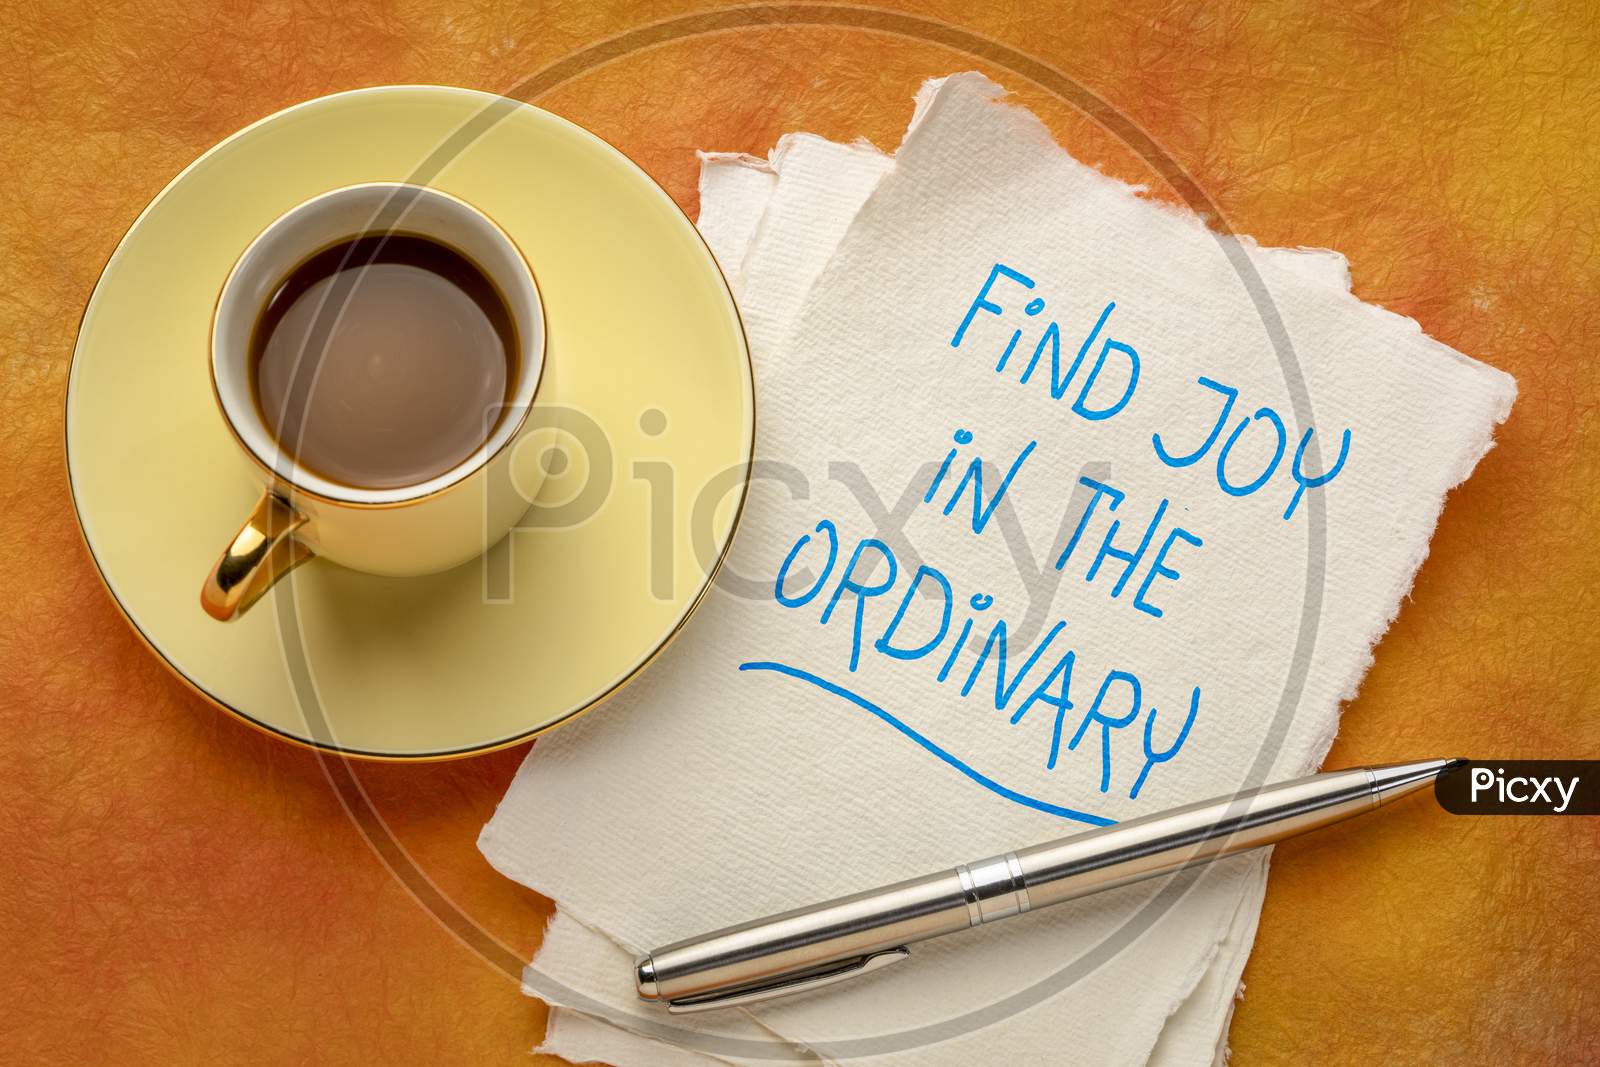 Find Joy In The Ordinary Inspirational Reminder Or Advice - Handwriting On A Handmade Paper With A Cup Of Coffee, Happiness, Positivity And Personal Development Concept